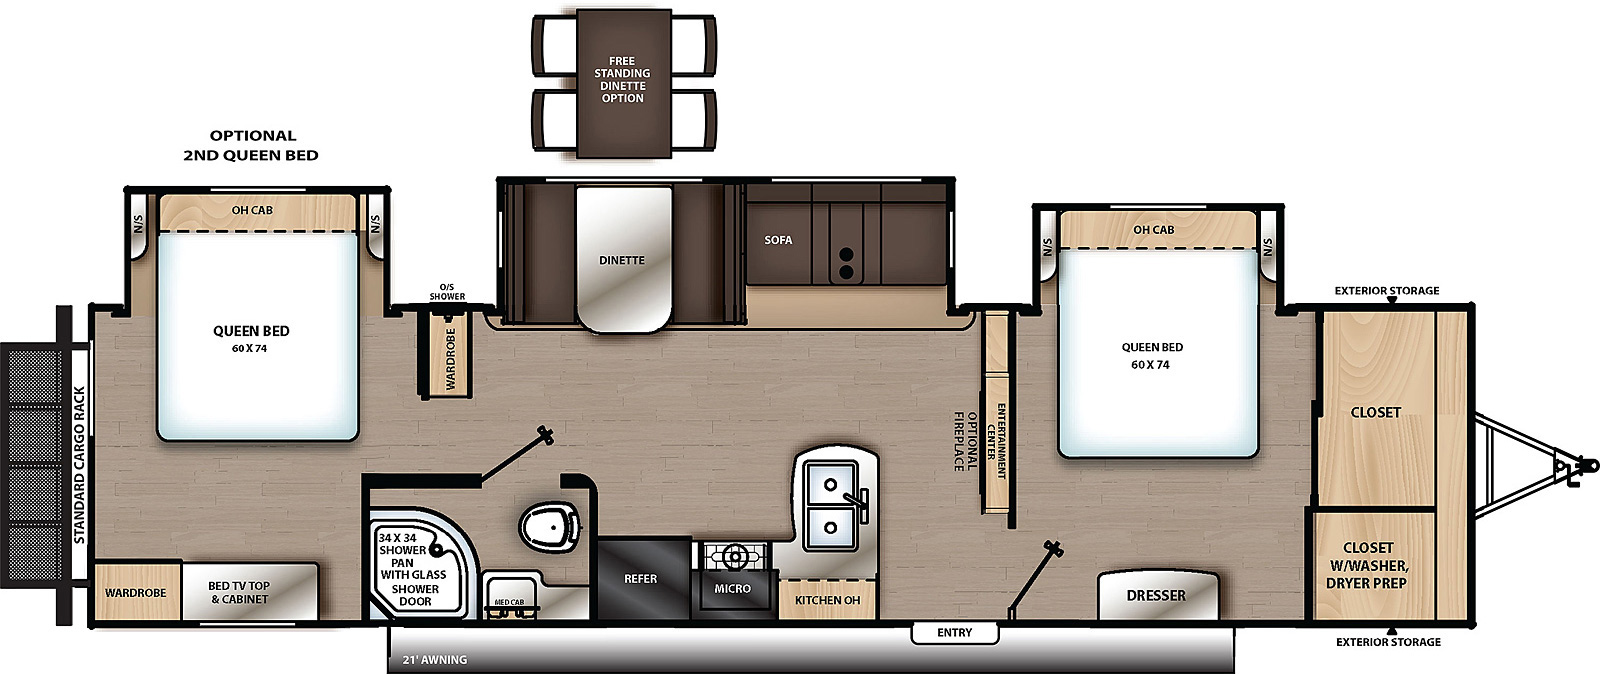 The 343BHTS has three slide outs on the off-door side and one entry door on the door side. Interior layout from front to back: front bedroom with off-door side slide out containing side facing queen bed and overhead cabinet, closet, and dresser; entertainment center; kitchen living dining area with off-door side slide out containing sofa and dinette; door side kitchen containing double basin sink, overhead cabinet, cook top stove, microwave cabinet, and refrigerator; door side bathroom; and rear bedroom with off-door side slide out containing side facing queen bed and overhead cabinet, cabinet, and wardrobe.